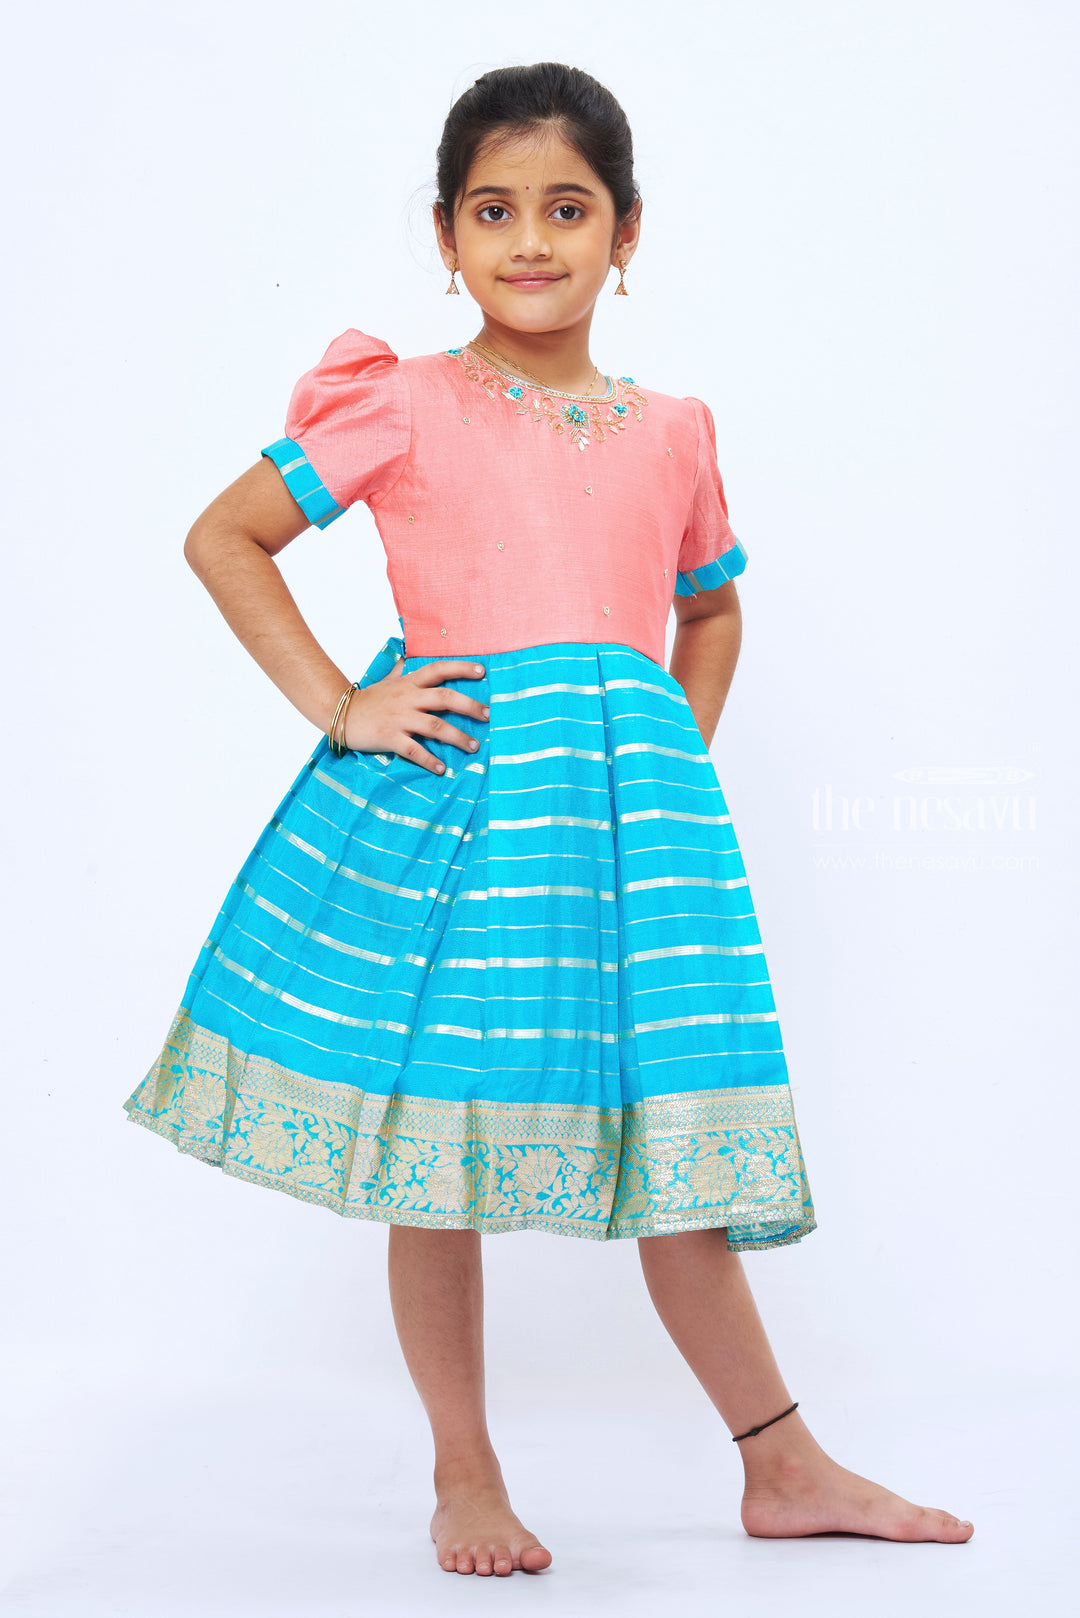 The Nesavu Silk Party Frock Pink and Blue Zari Embroidered Silk Frock - Elegant Traditional Wear for Girls Nesavu Girls' Pink Silk Frock with Blue Zari Embroidery | Luxurious Festive Dress | The Nesavu